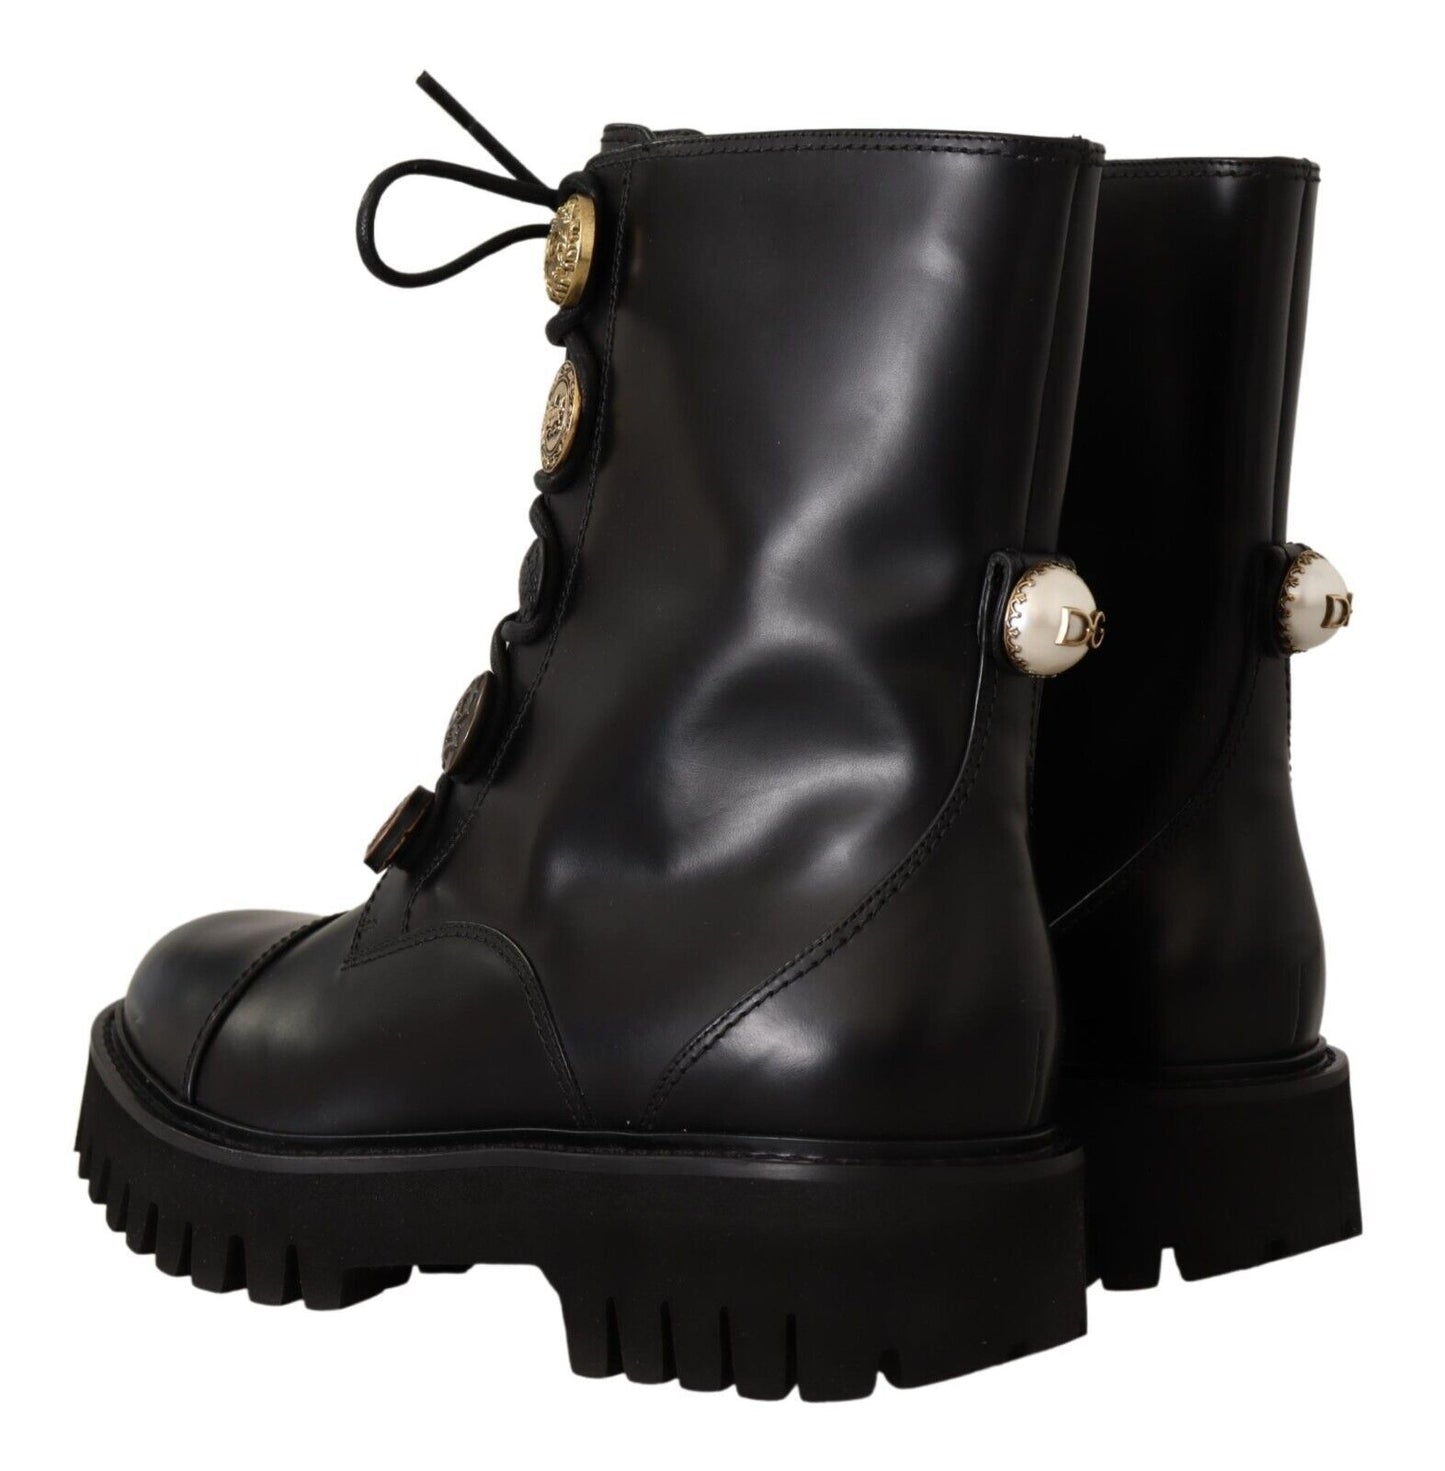 Authentic Leather Biker Boots in Chic Black